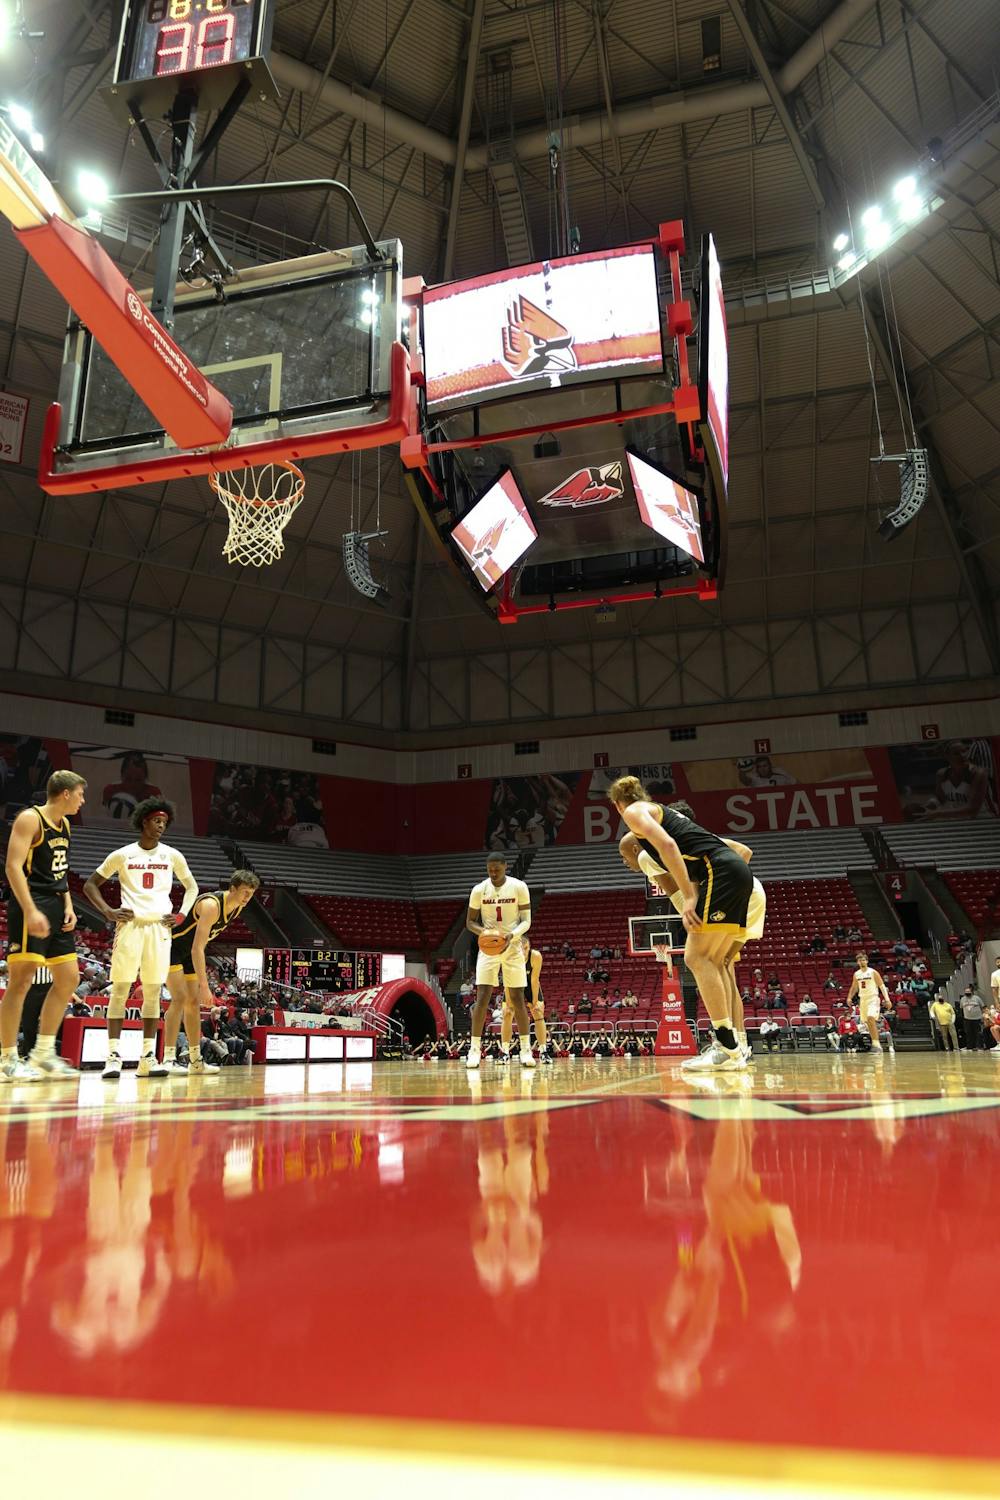 Ball State Men's Basketball faced off against the Michigan Tech on Nov. 3 at Worthen Arena. The Huskies beat the Cardinals 70-69.